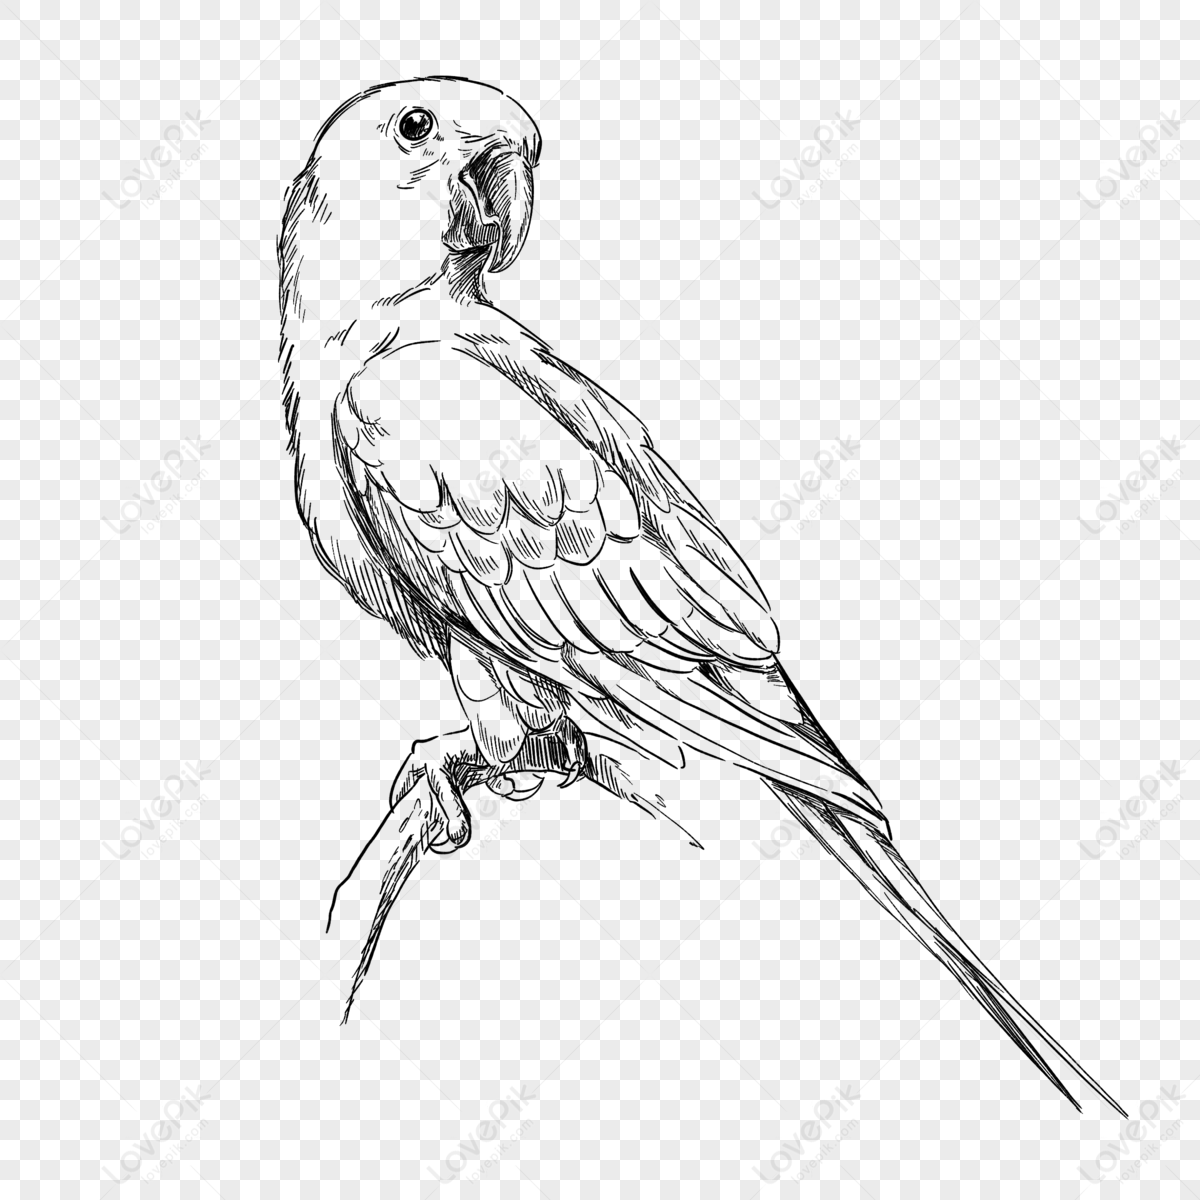 Continuous one line art drawing of bird Royalty Free Vector